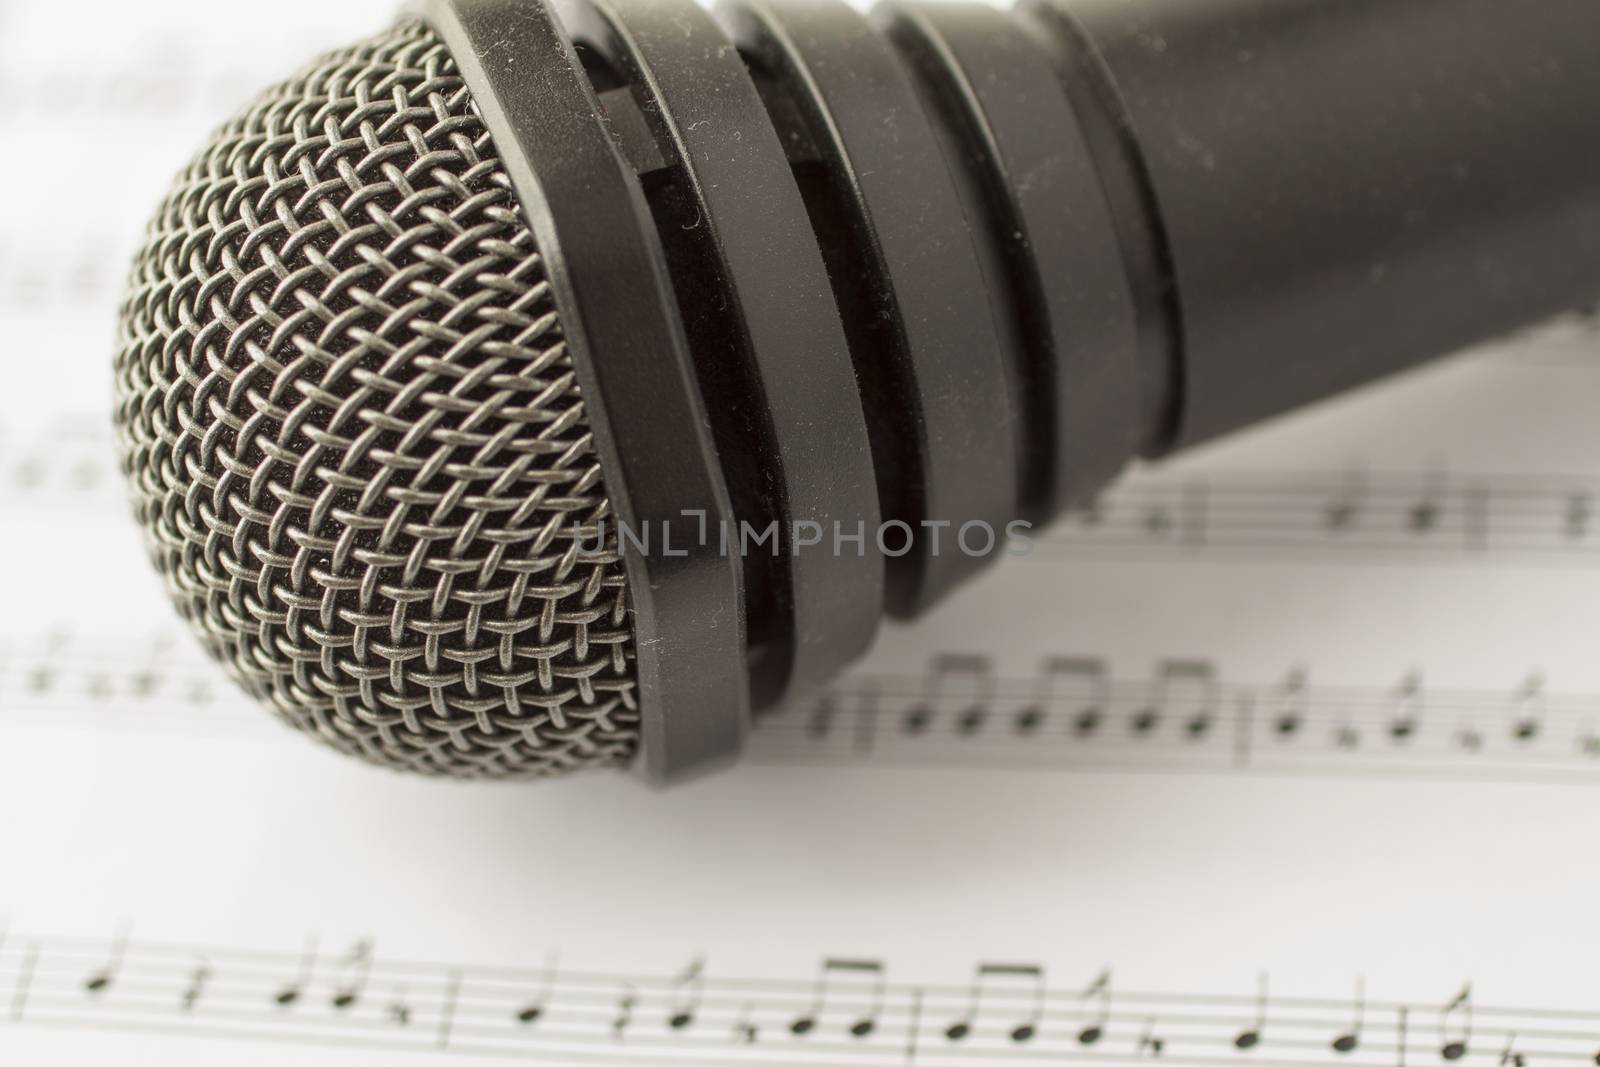 Microphone over score by Koufax73